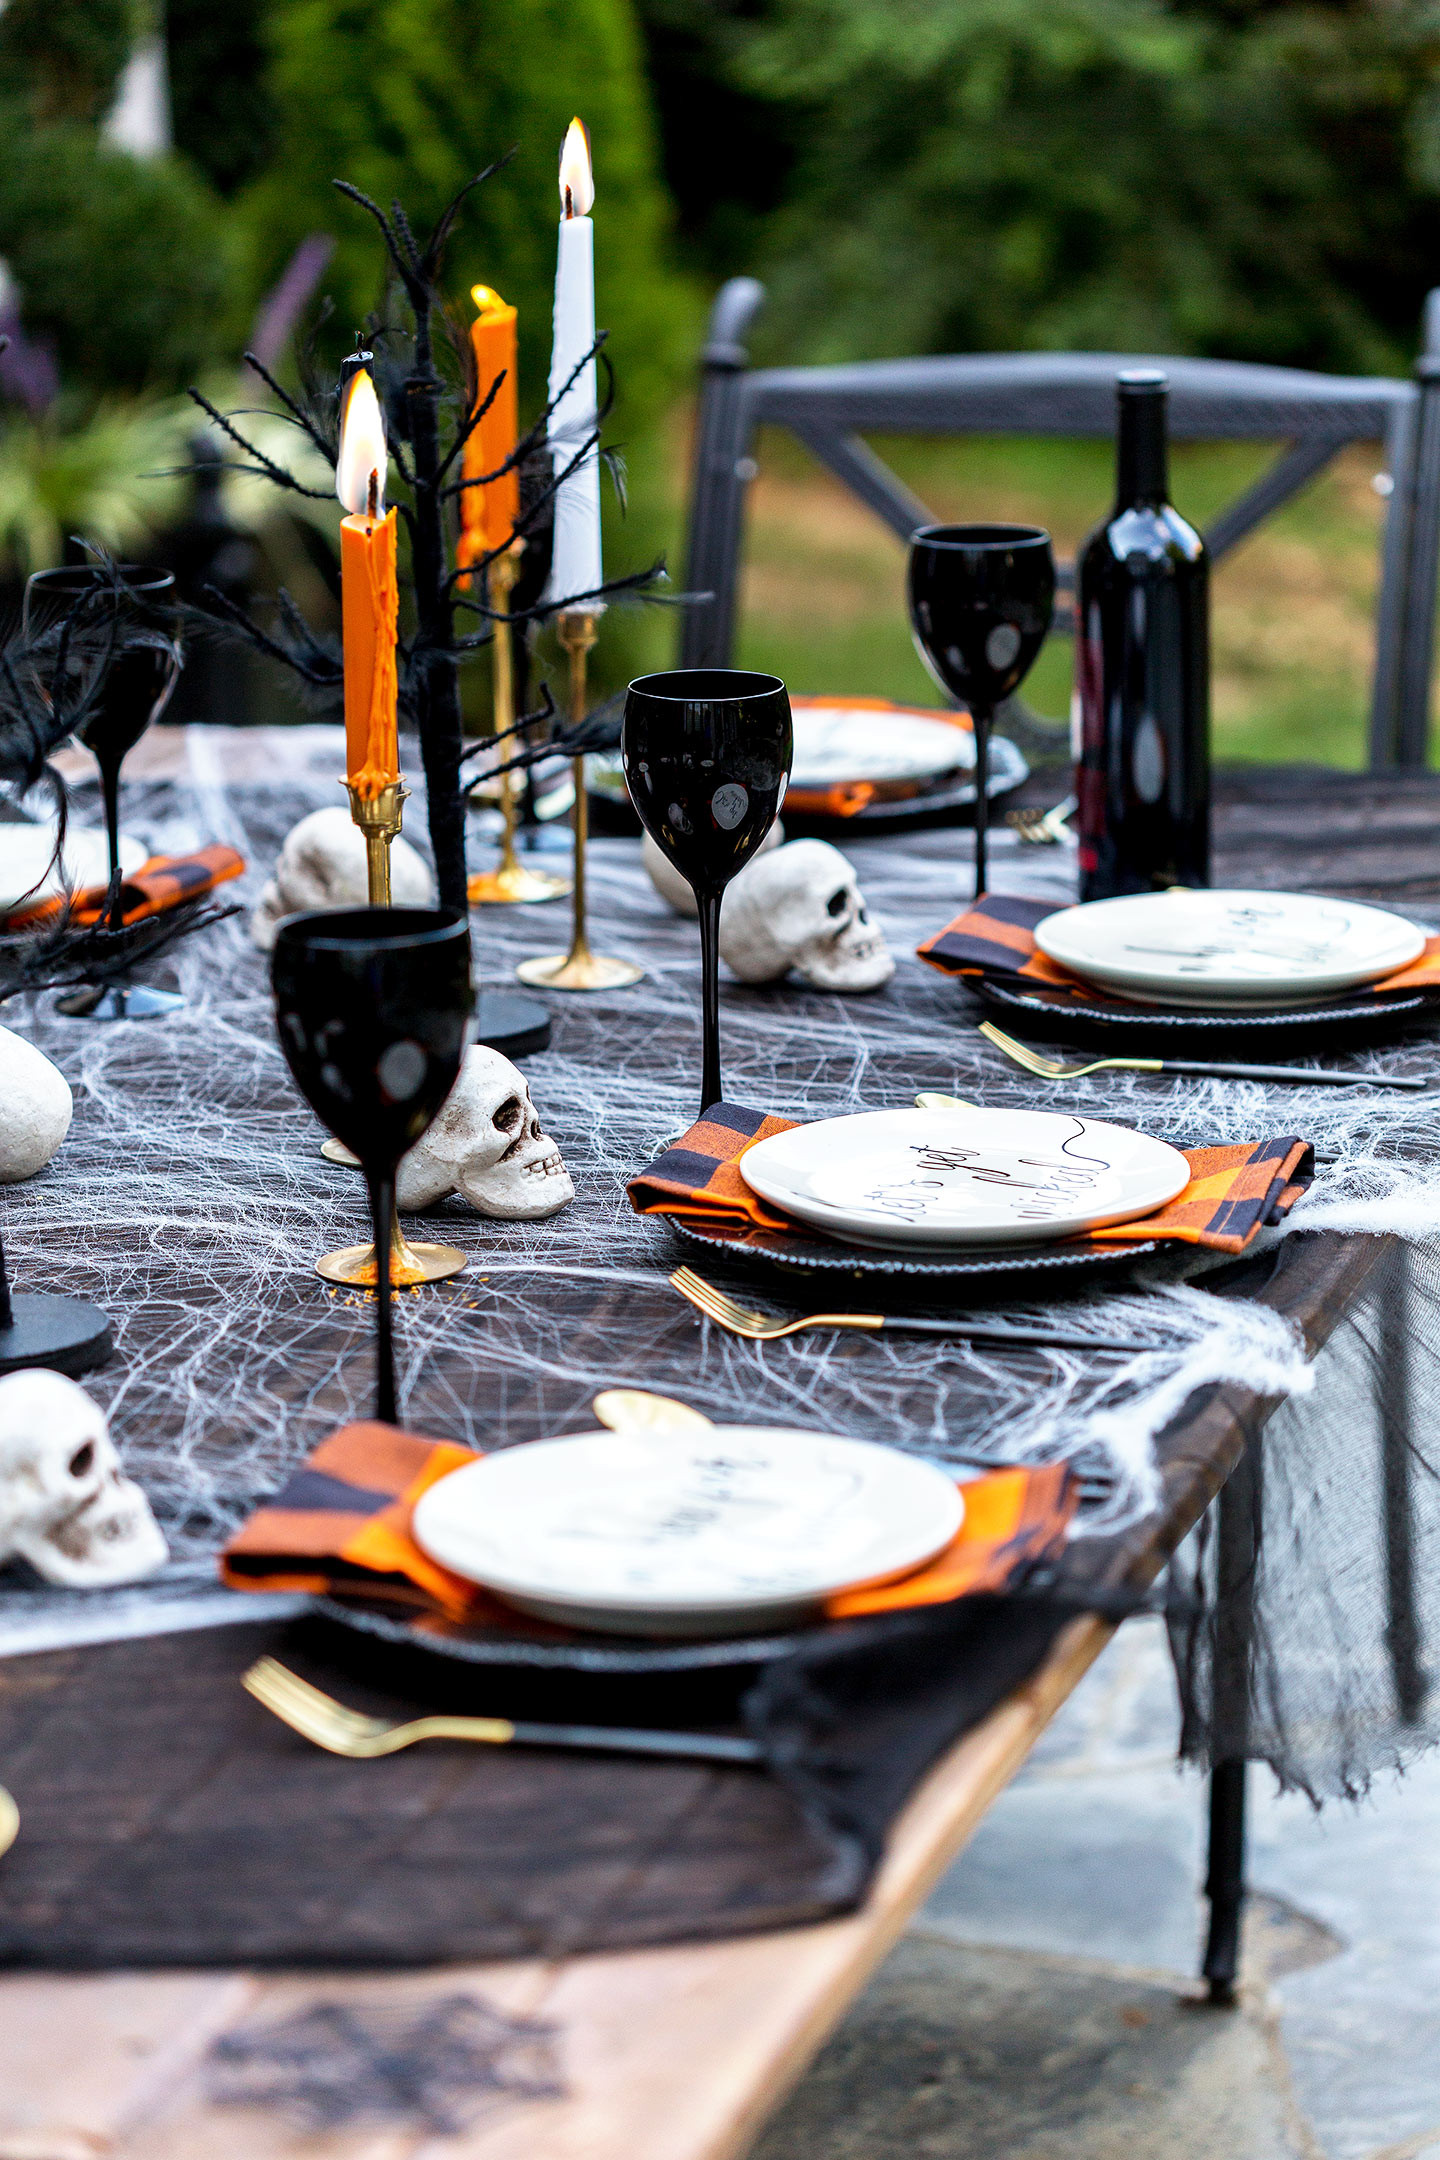 Halloween Theme Party Ideas For Adults
 Adult Halloween Party Decorations & Halloween Menu Ideas